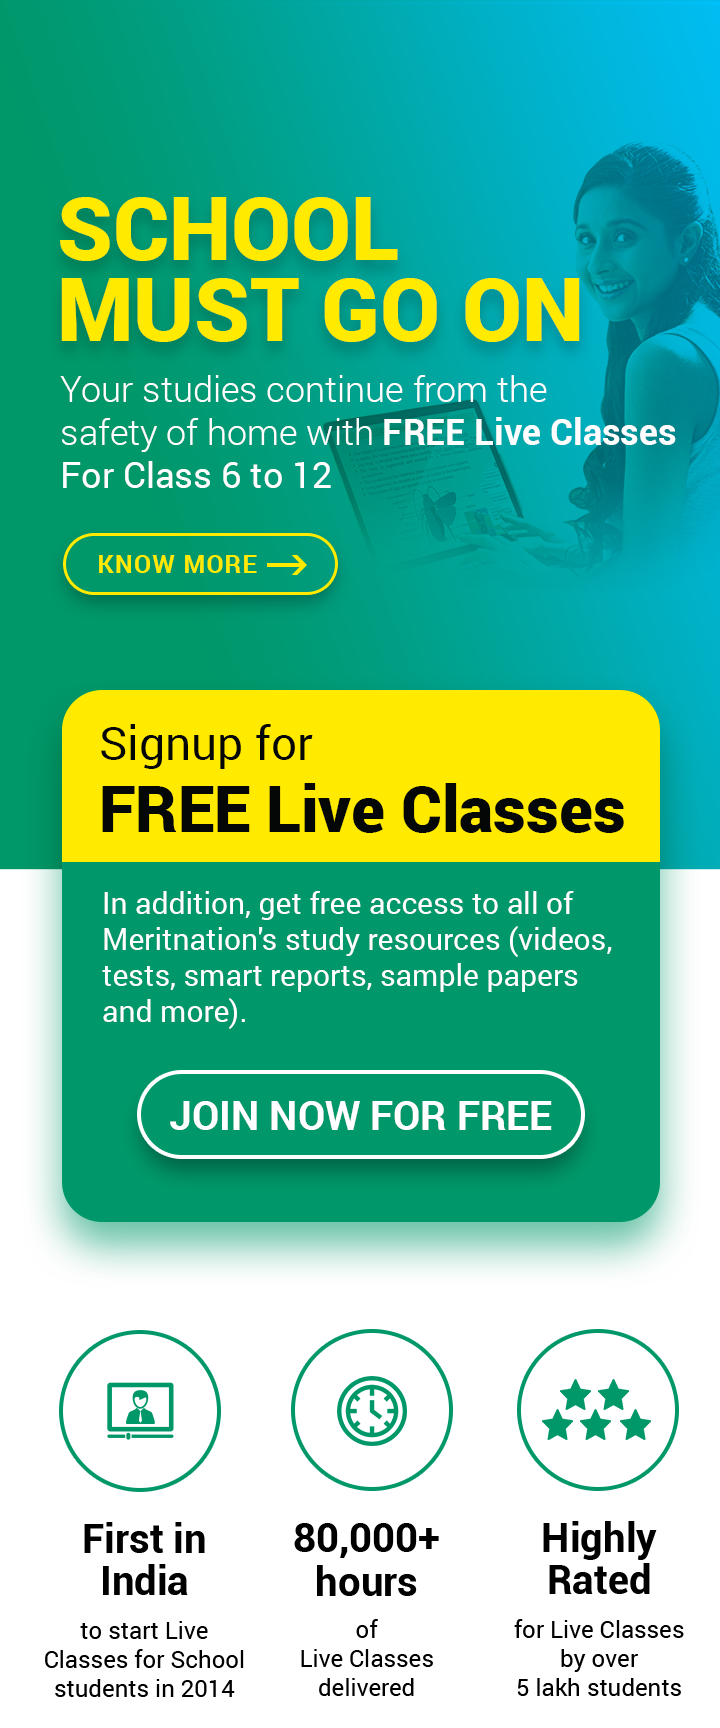 To assist Students amidst COVID-19 Shutdown, Meritnation Offers Online Live Classes for Grades 6-12, for Free decoding=